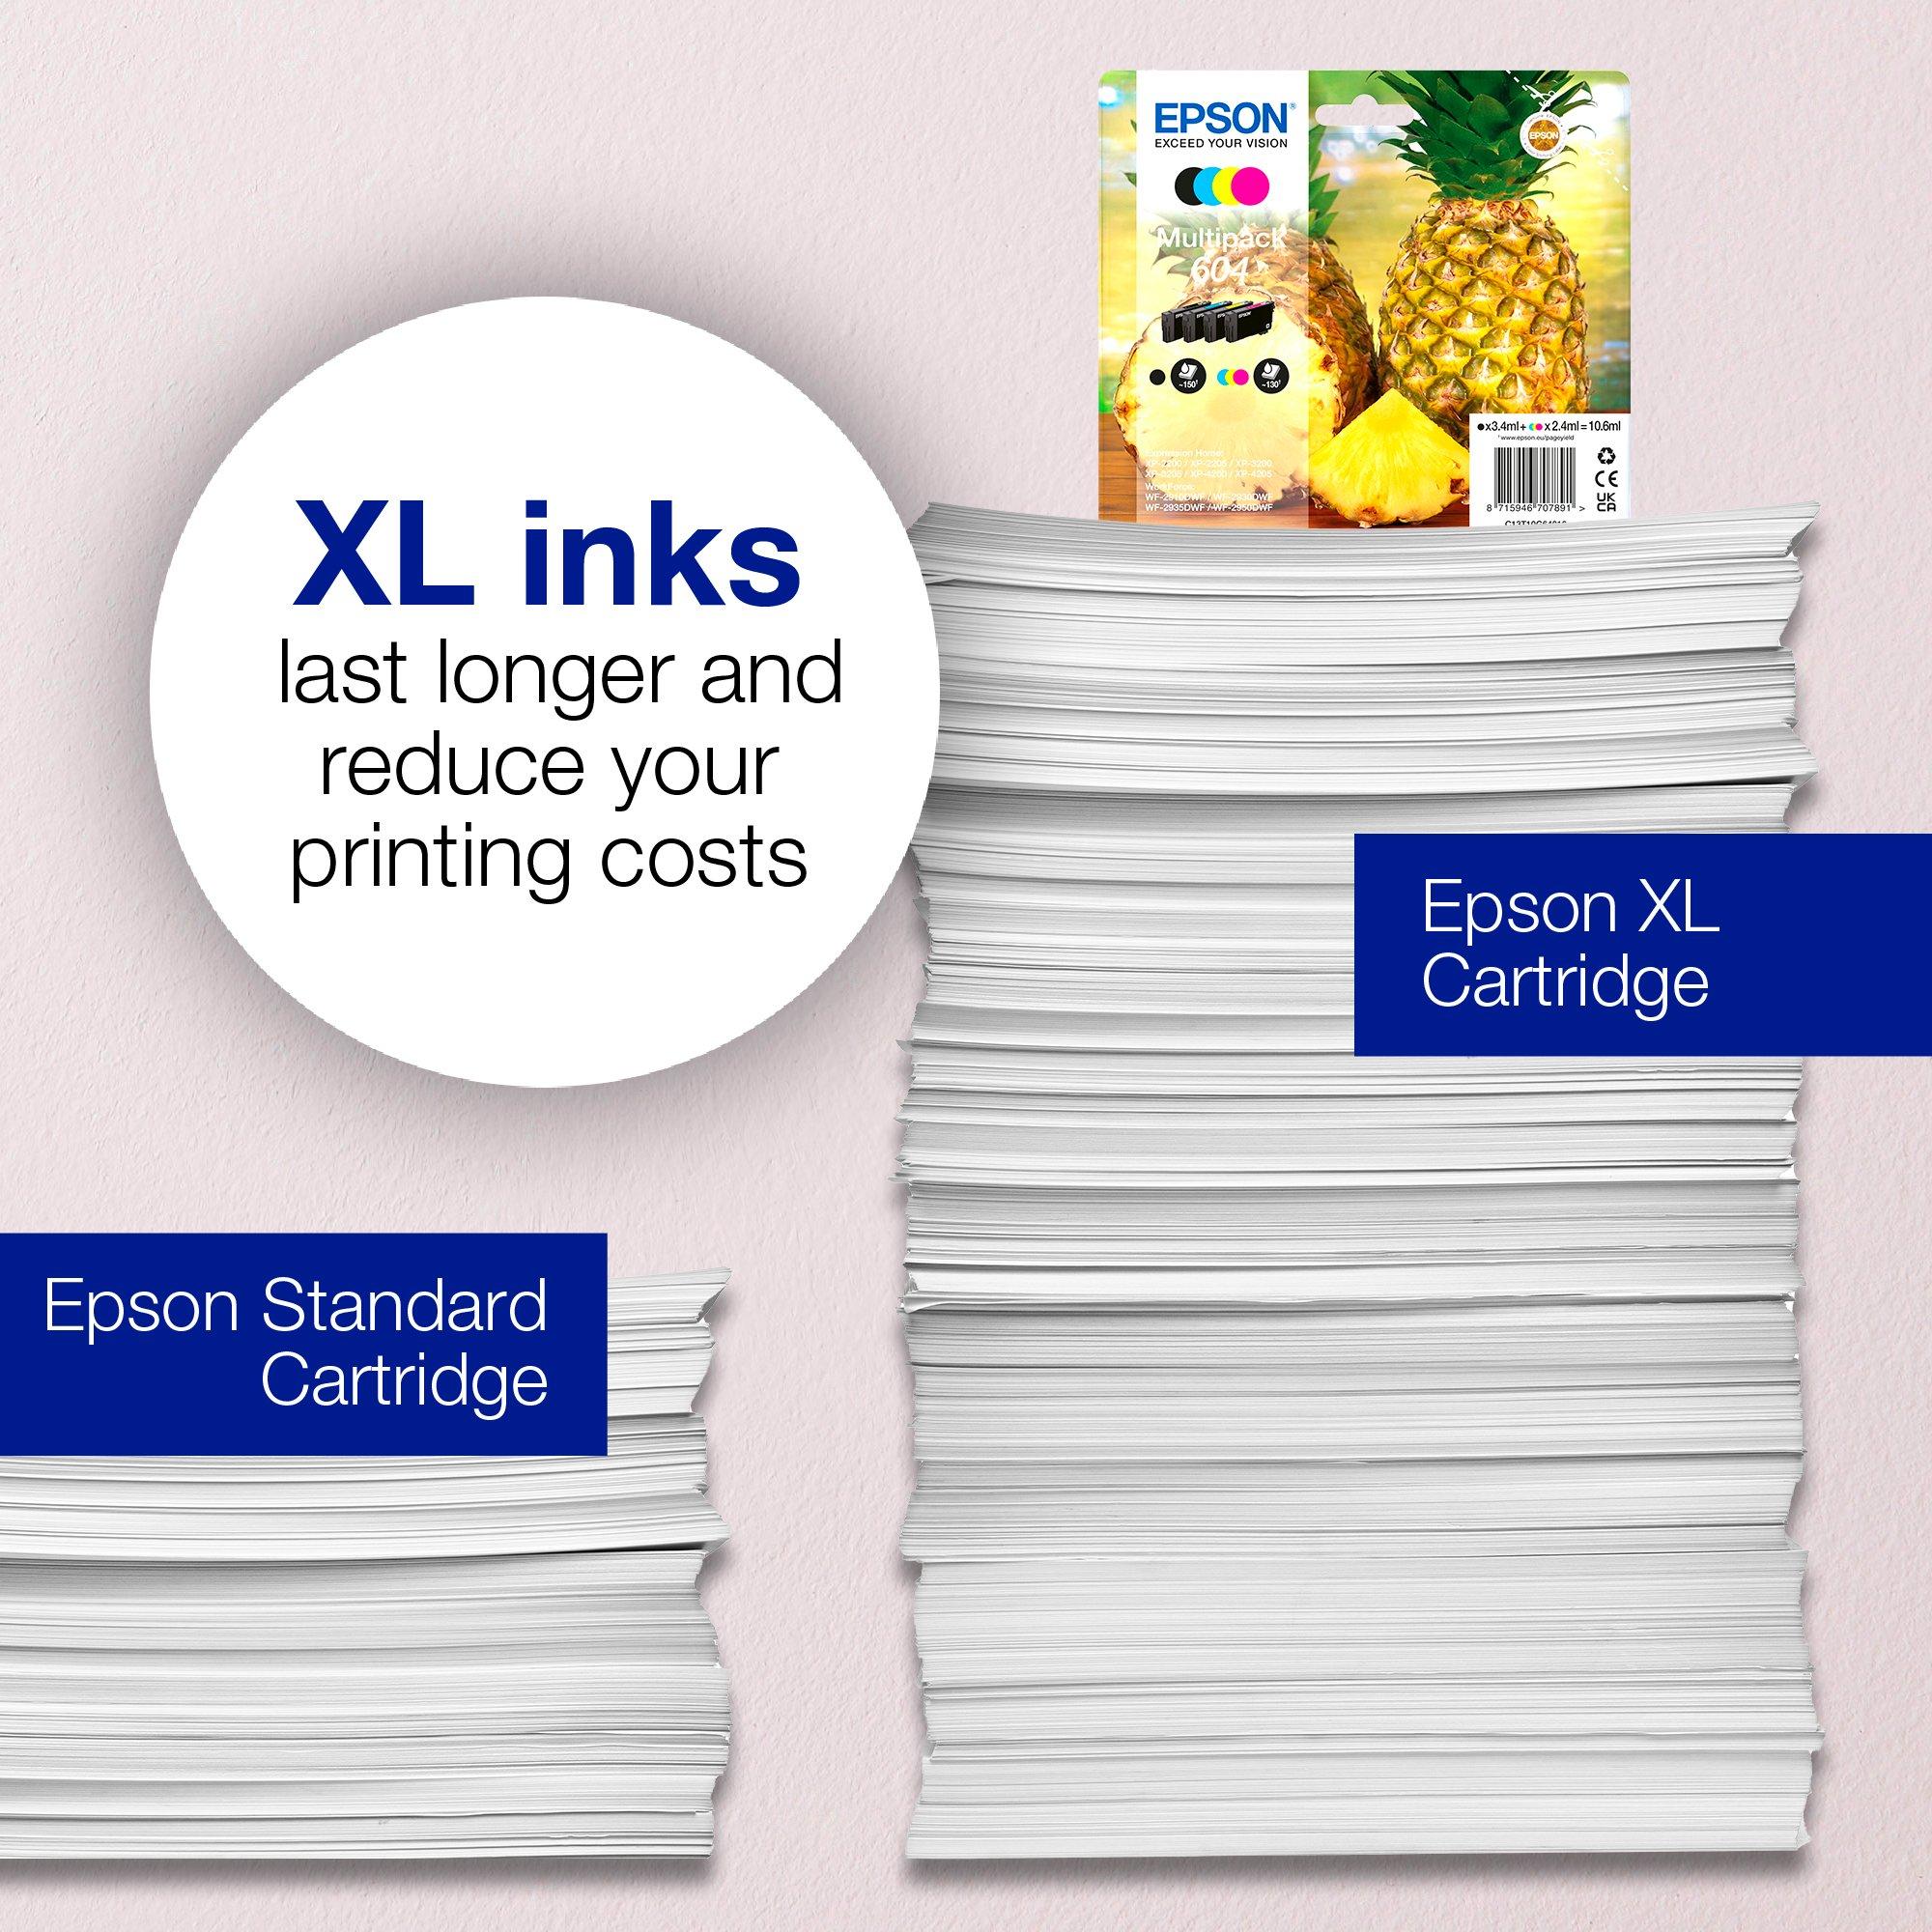 europe only 604 ink cartridge chip